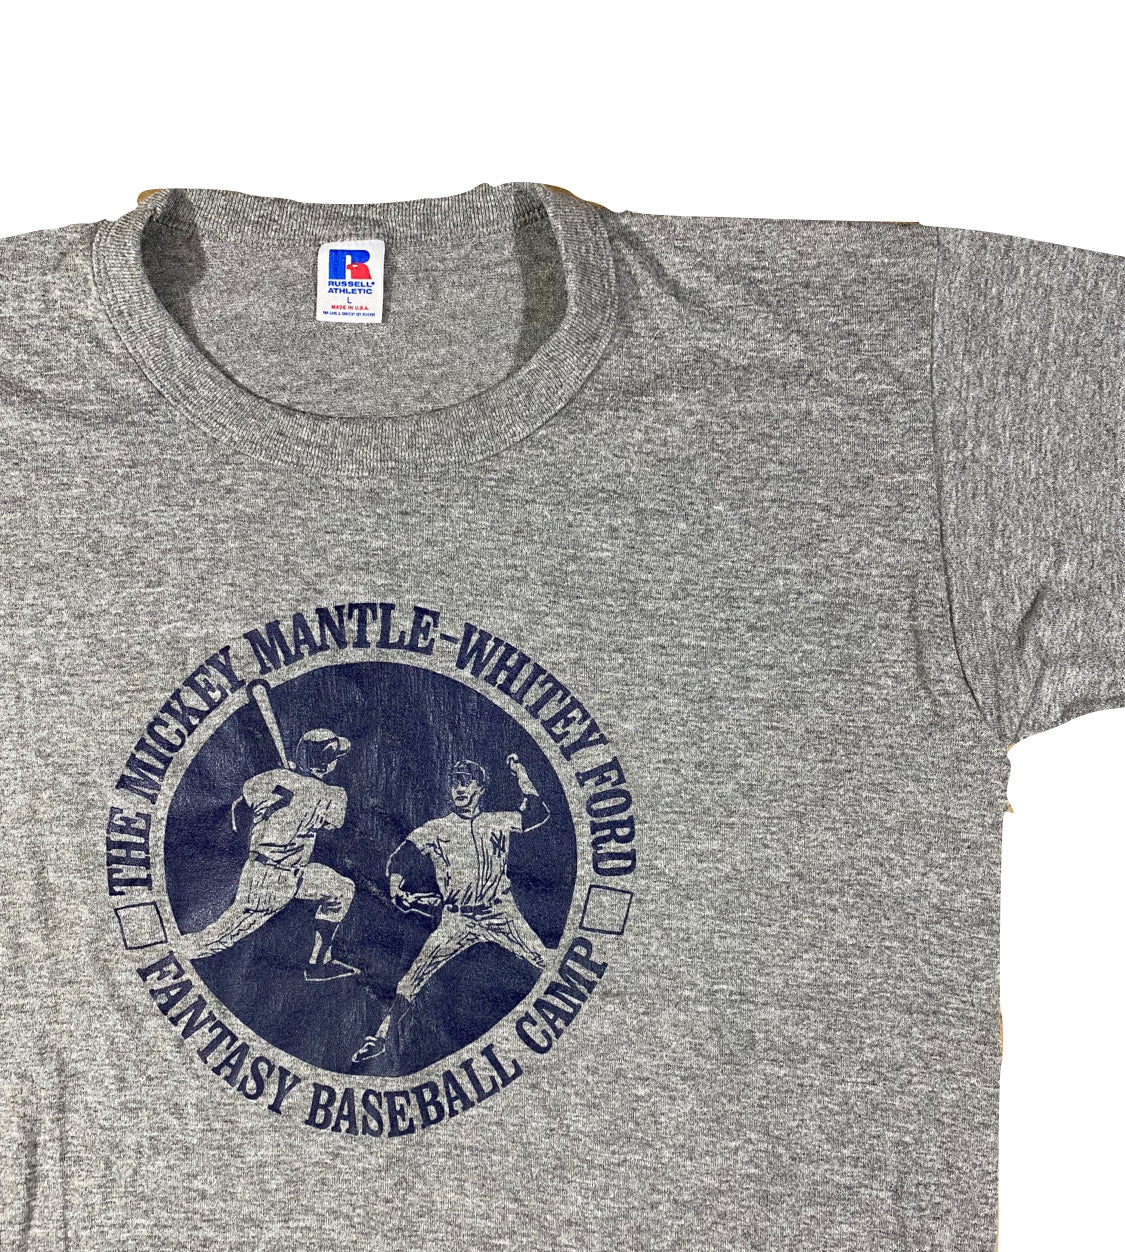 90s Mickey mantle fantasy camp. large